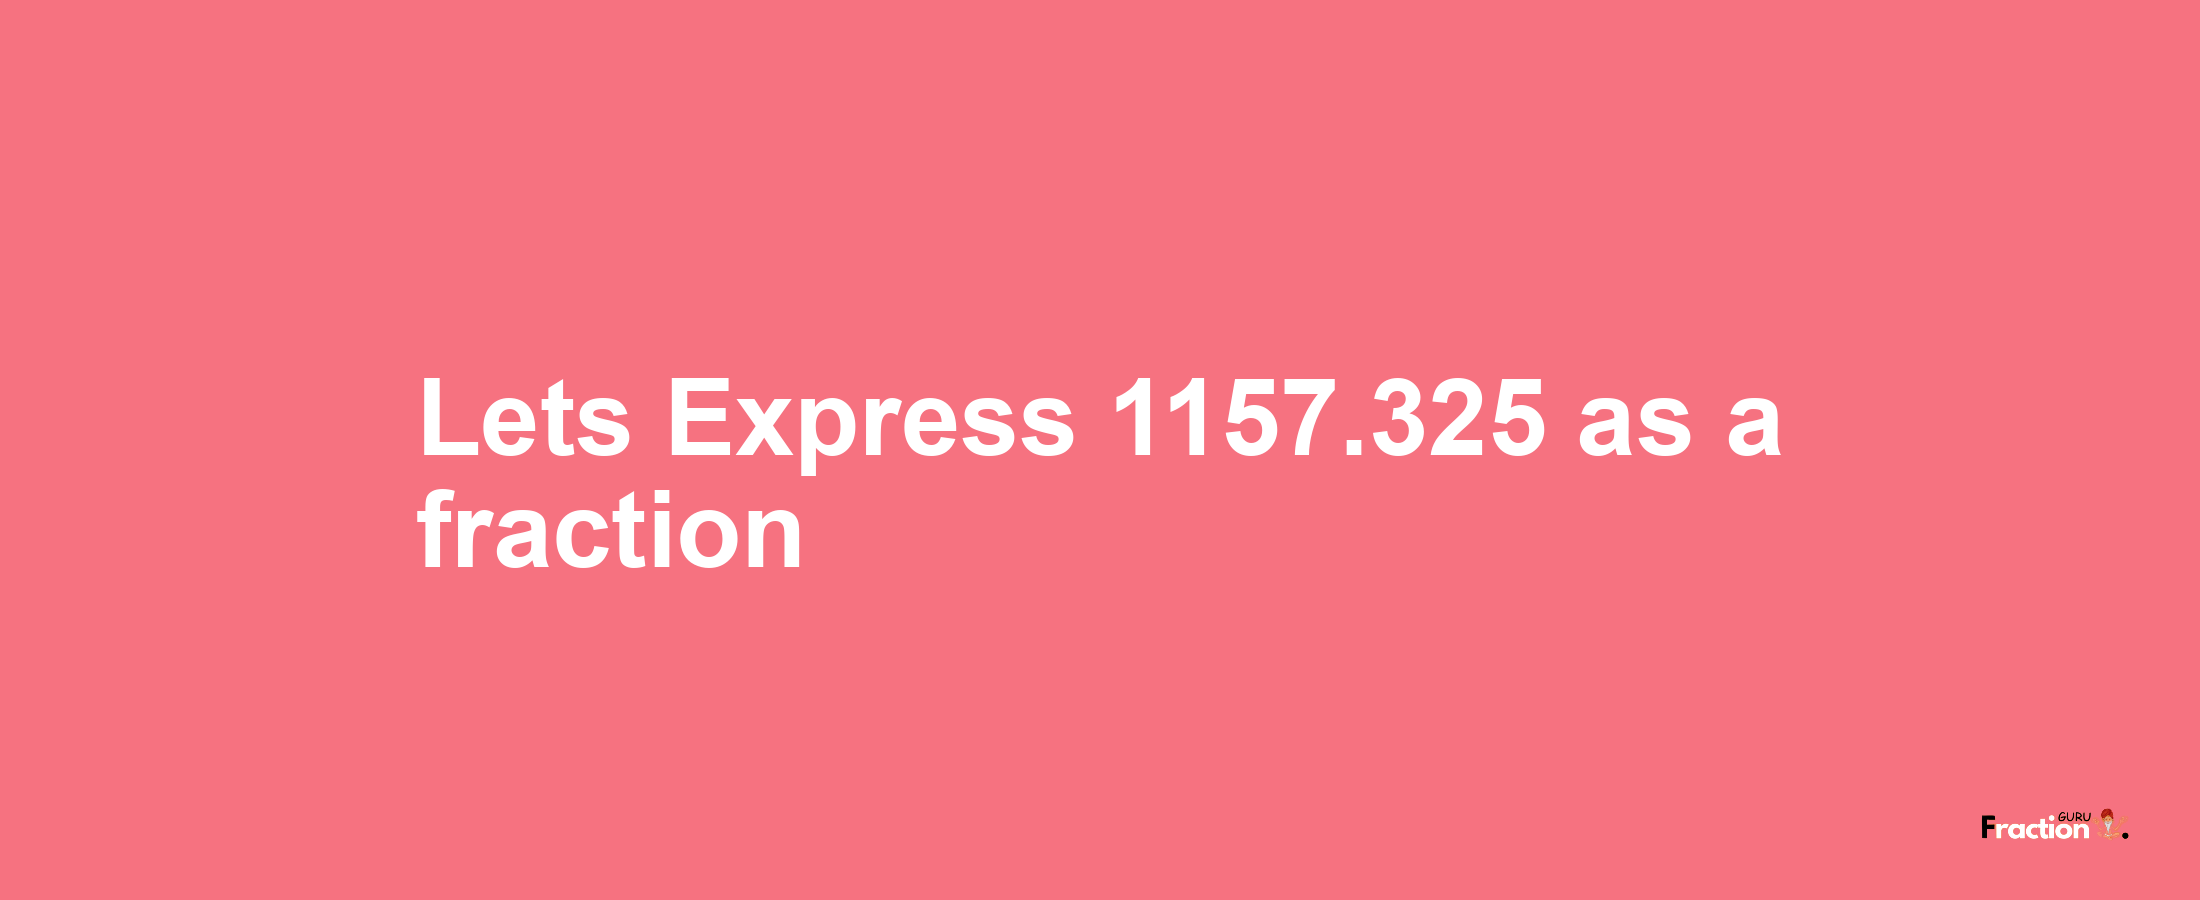 Lets Express 1157.325 as afraction